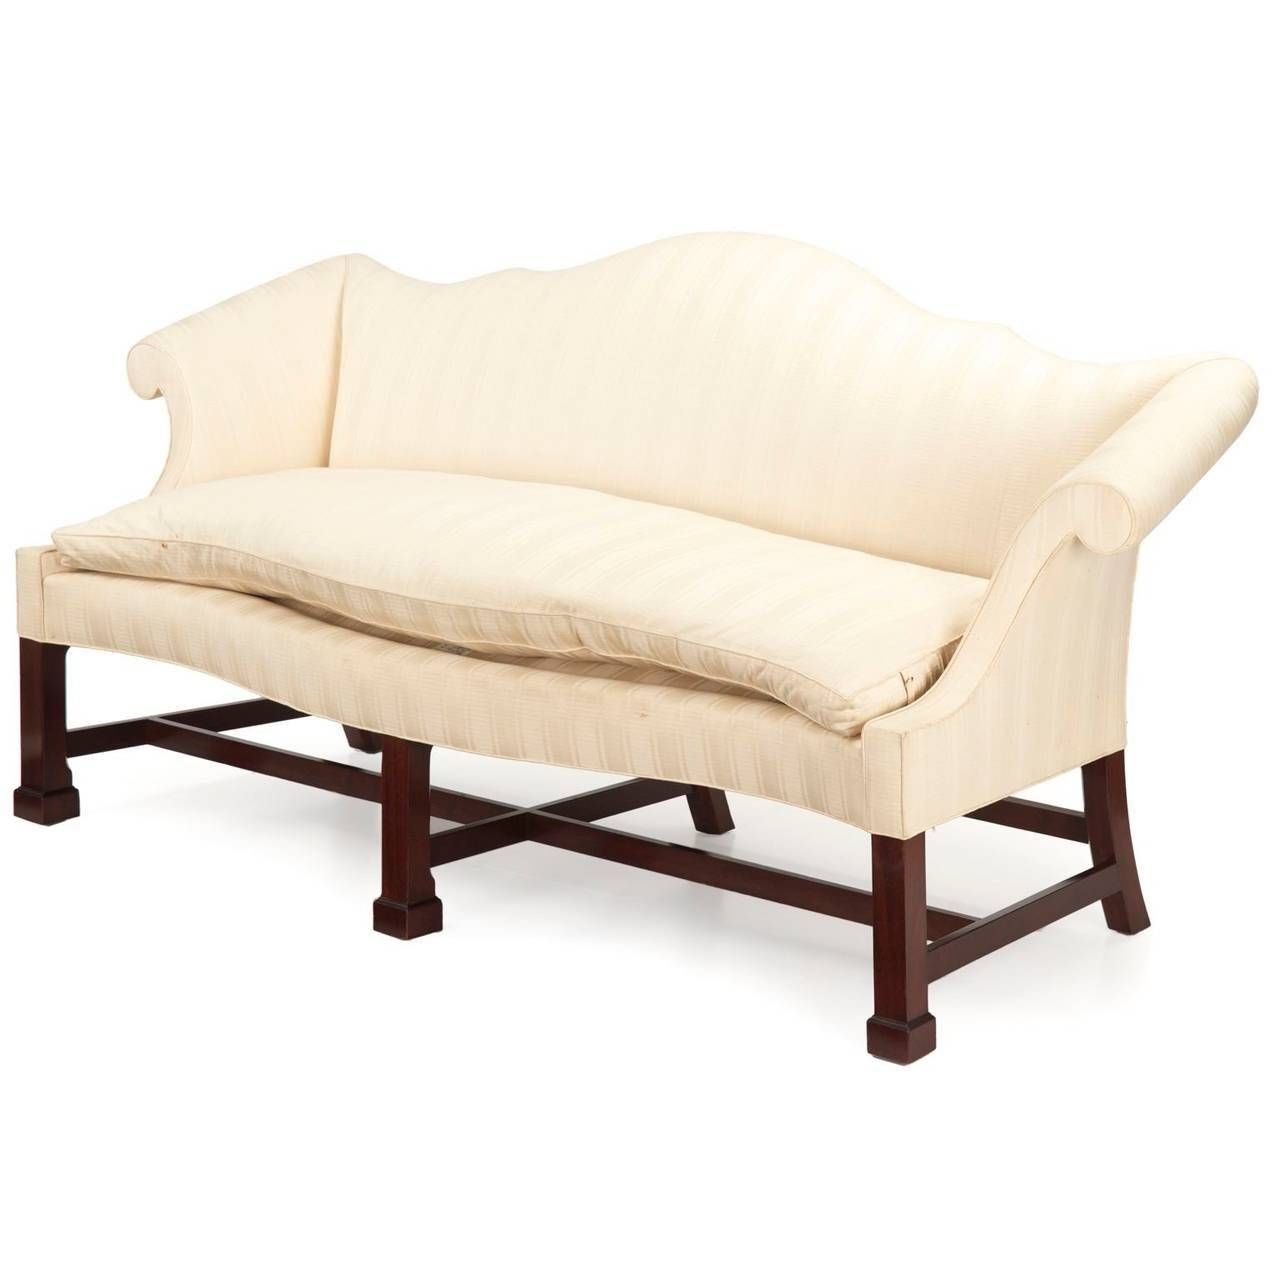 American Chippendale Style Mahogany Camel Back Sofa At 1stdibs Inside Chippendale Camelback Sofas (View 12 of 15)